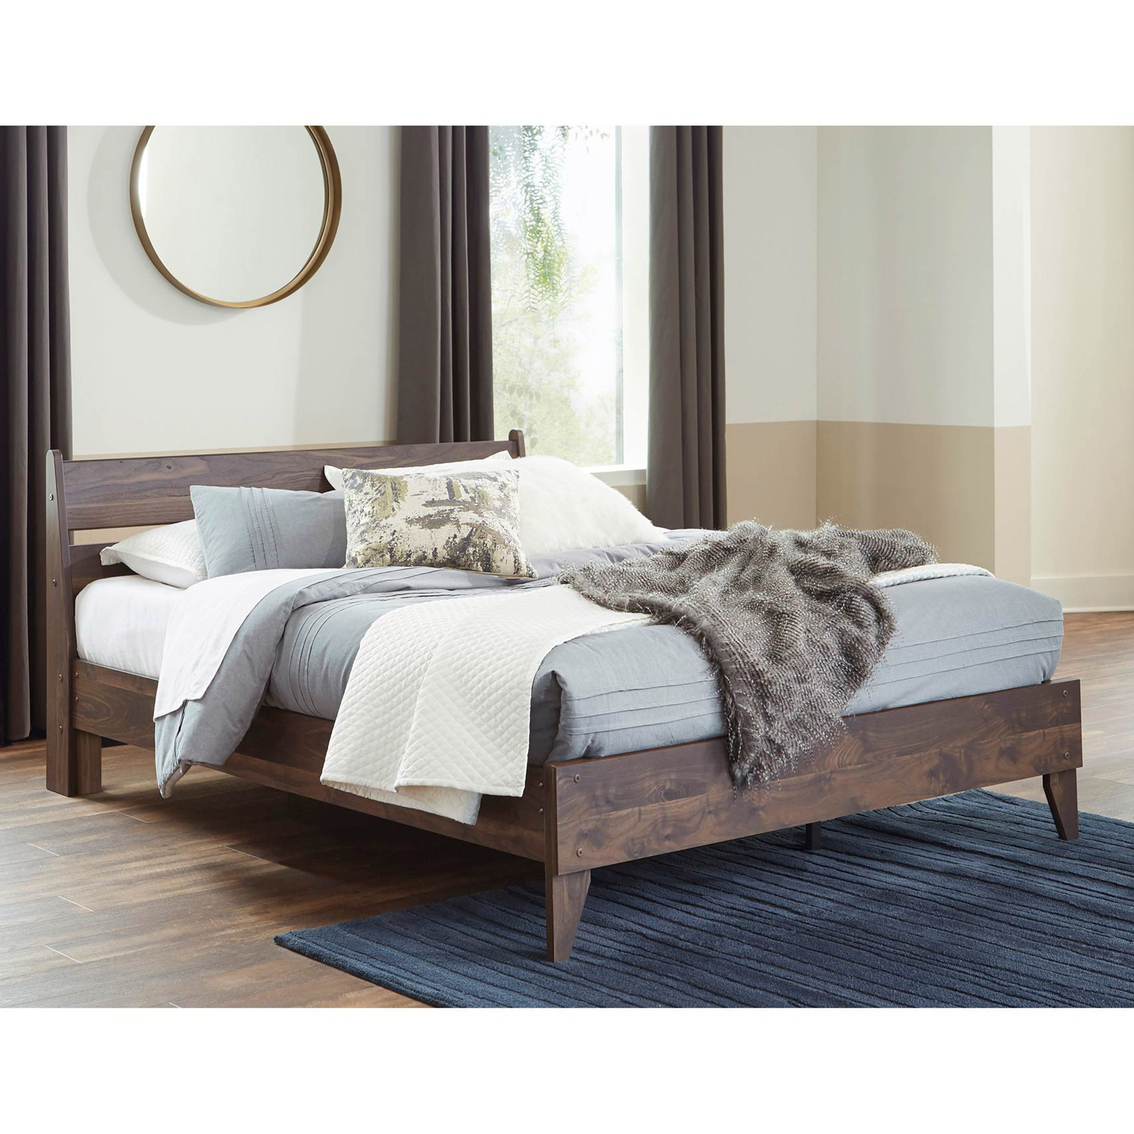 Signature Design by Ashley Calverson Platform Bed with Headboard - Image 5 of 6